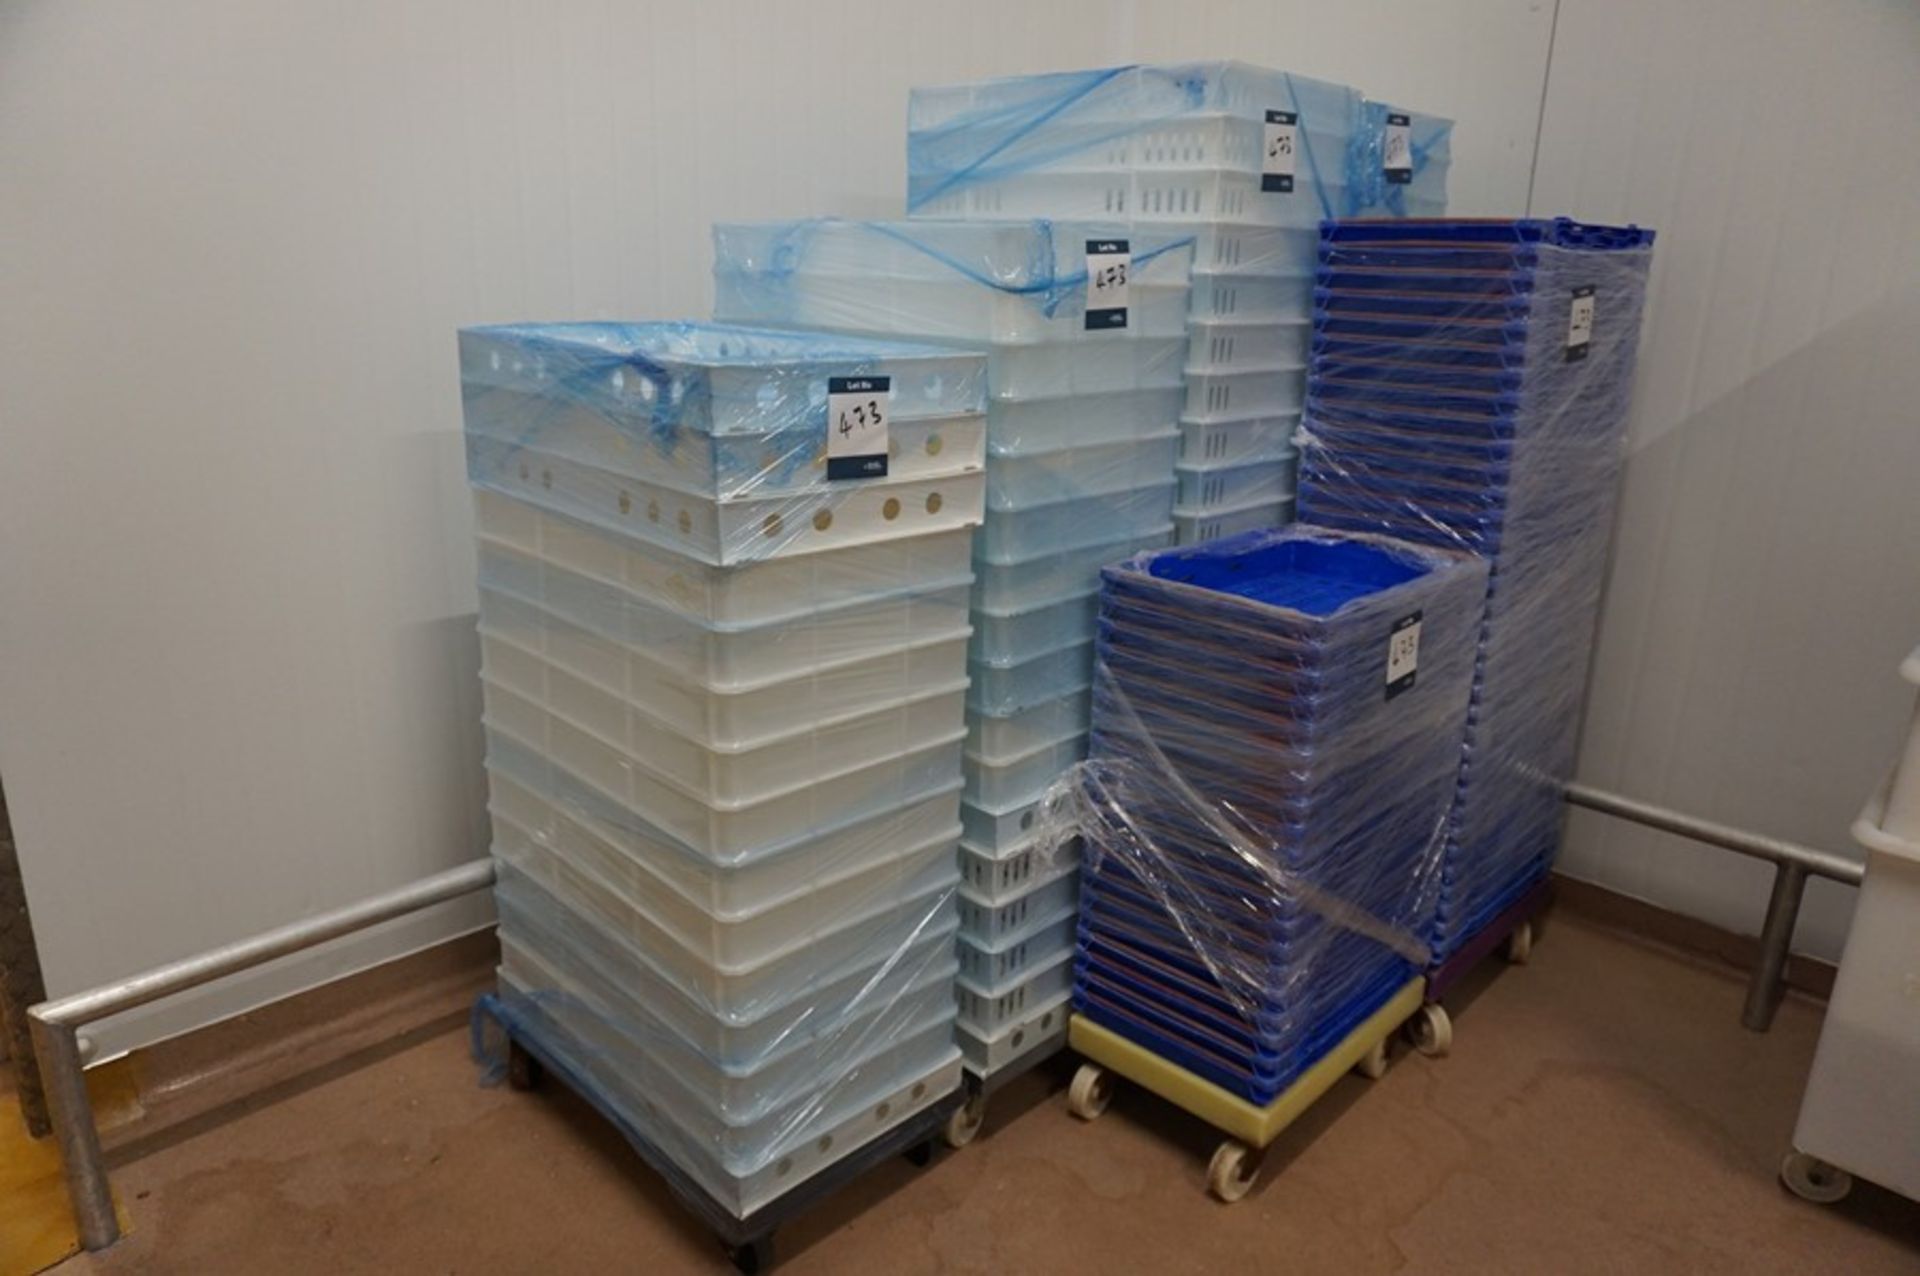 Approx. 100 x plastic storage crates, as lotted